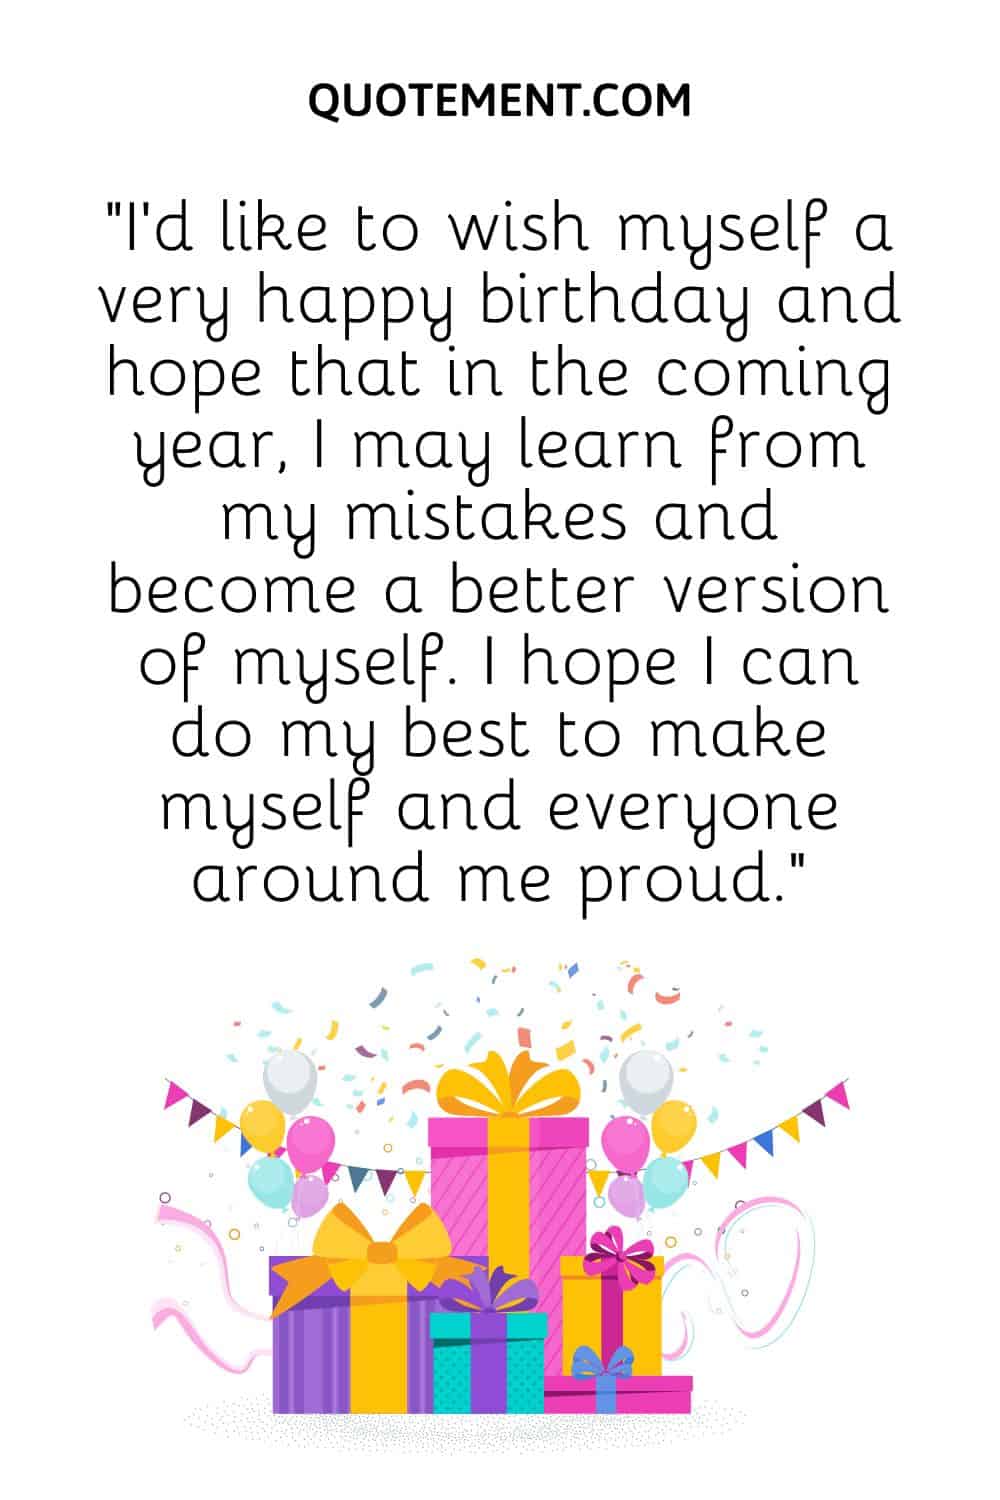 I’d like to wish myself a very happy birthday and hope that in the coming year, I may learn from my mistakes and become a better version of myself.